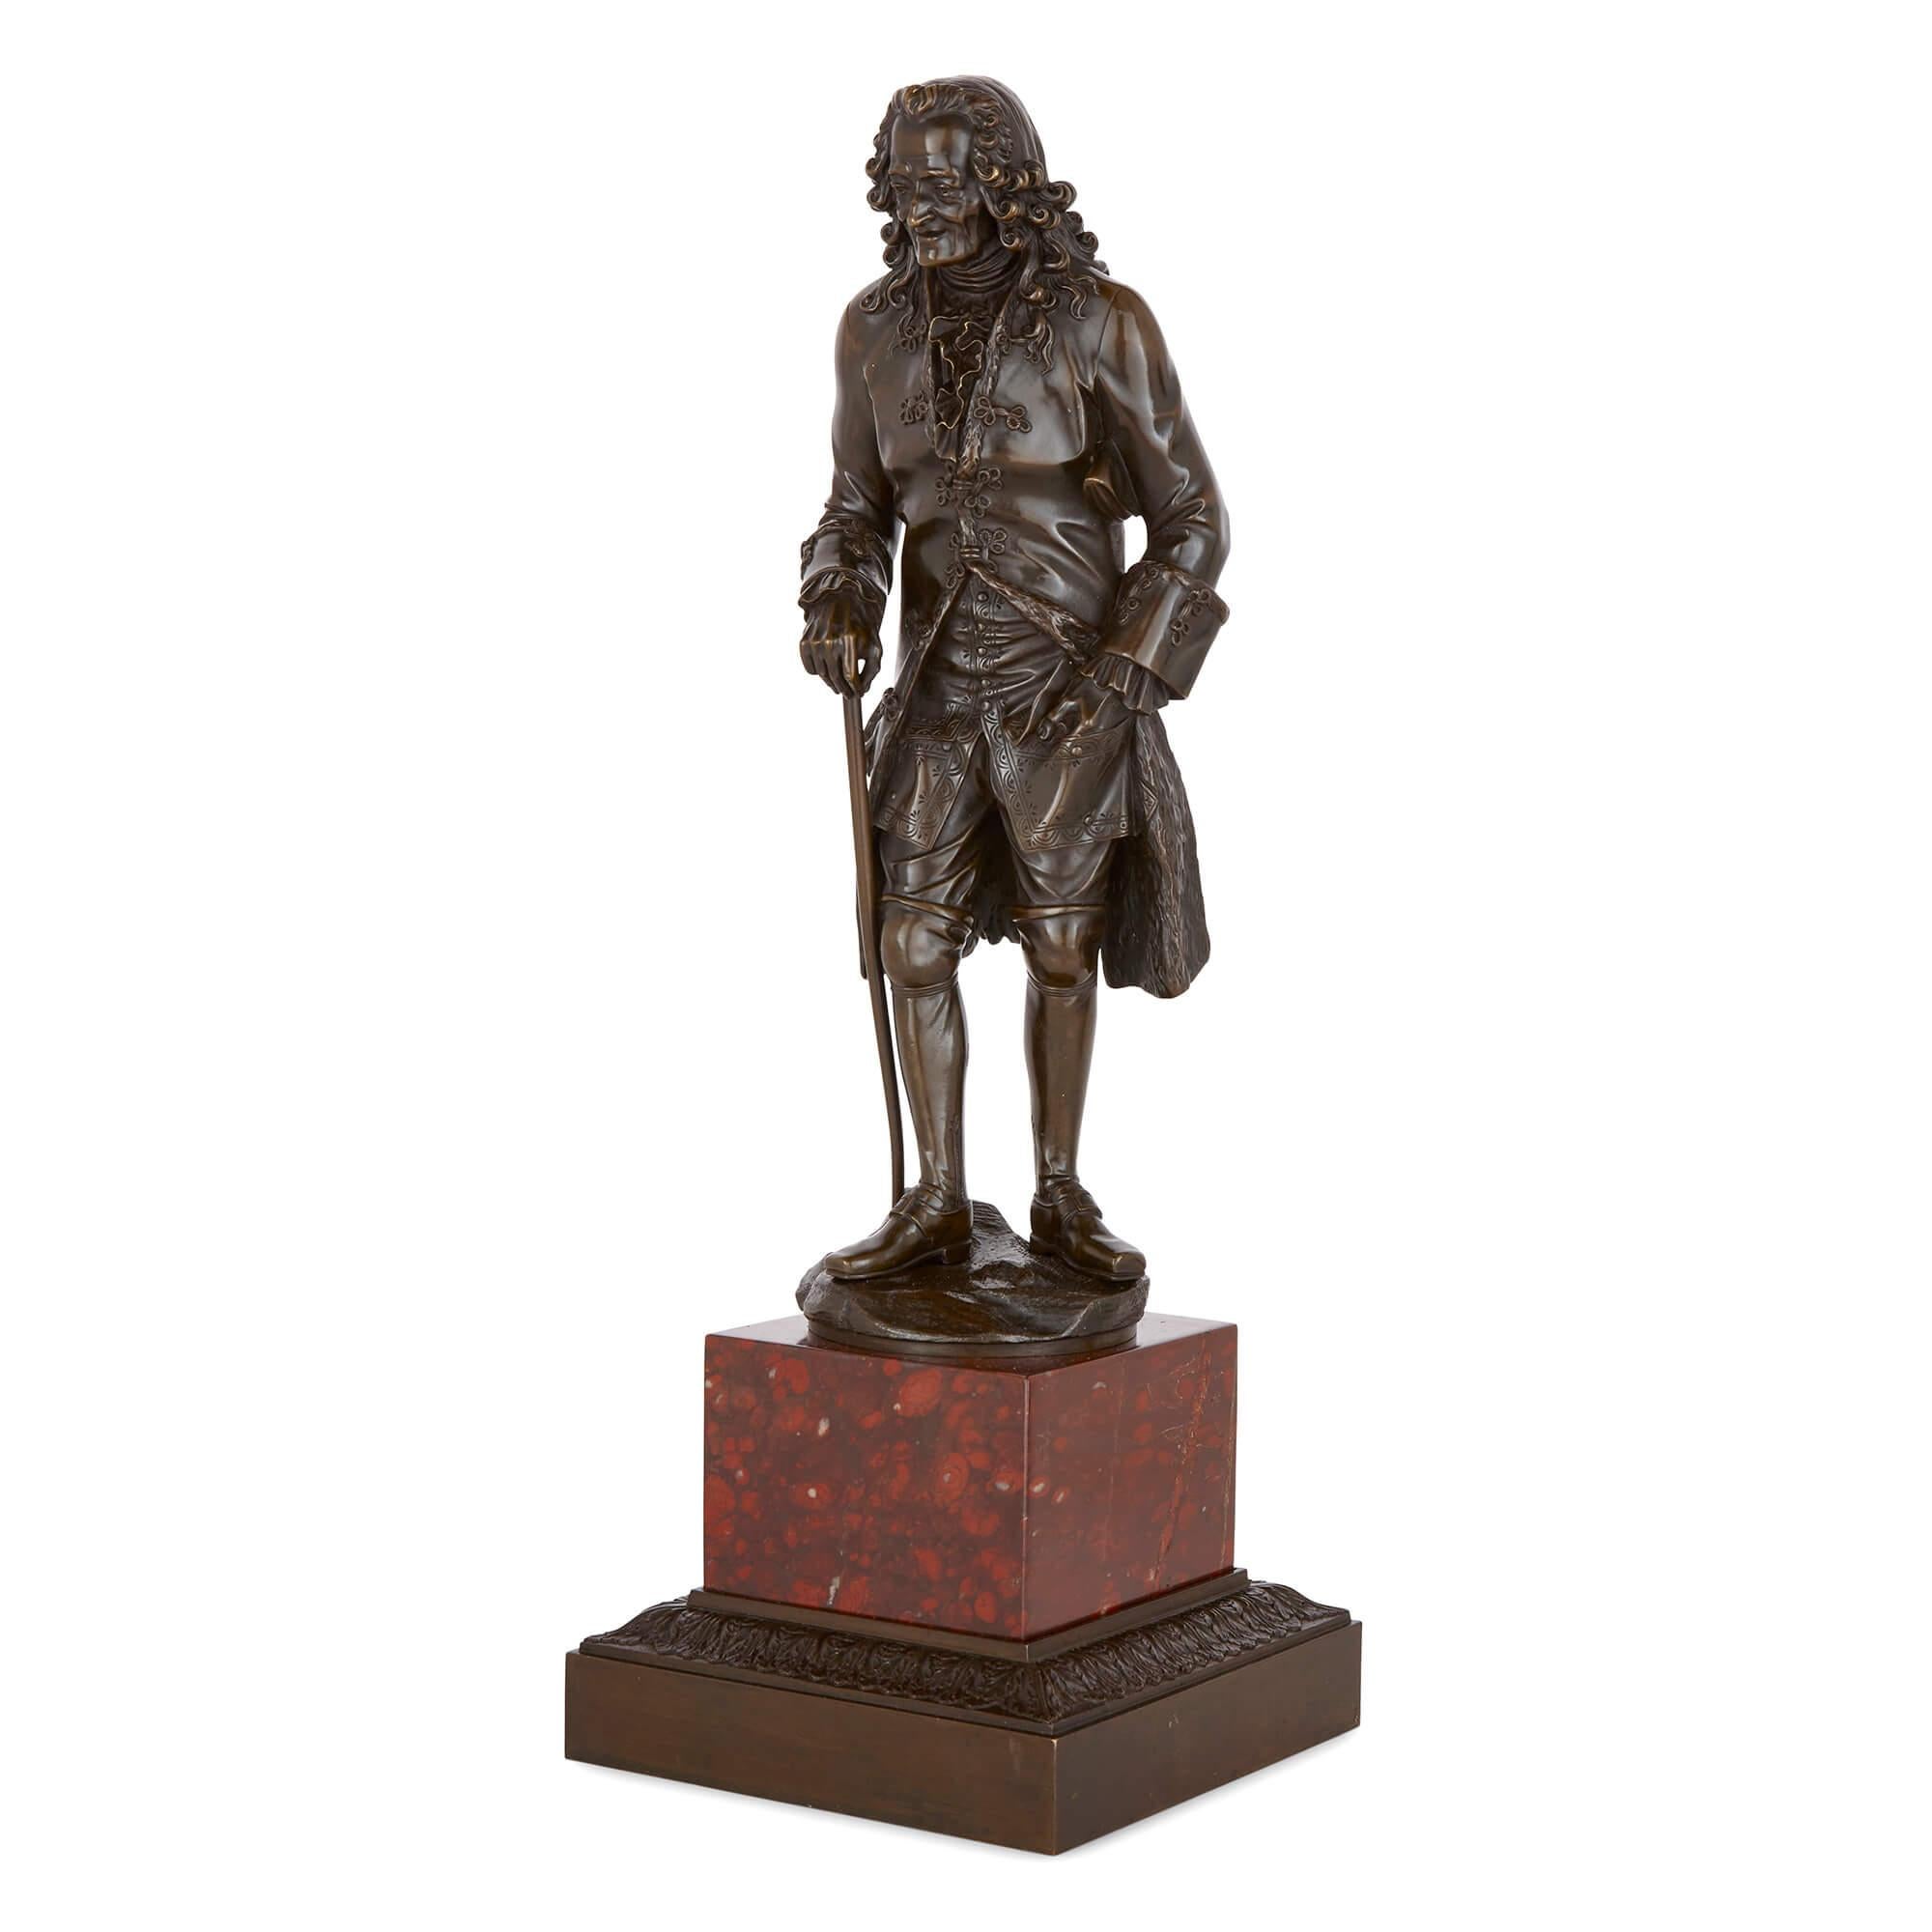 Pair of French patinated-bronze sculptures of Voltaire and Rousseau
French, Mid 19th century
Measures: Height 47/48cm, width 17cm, depth 17cm

These excellent sculptures depict the Enlightenment philosophers Voltaire and Rousseau, and are made